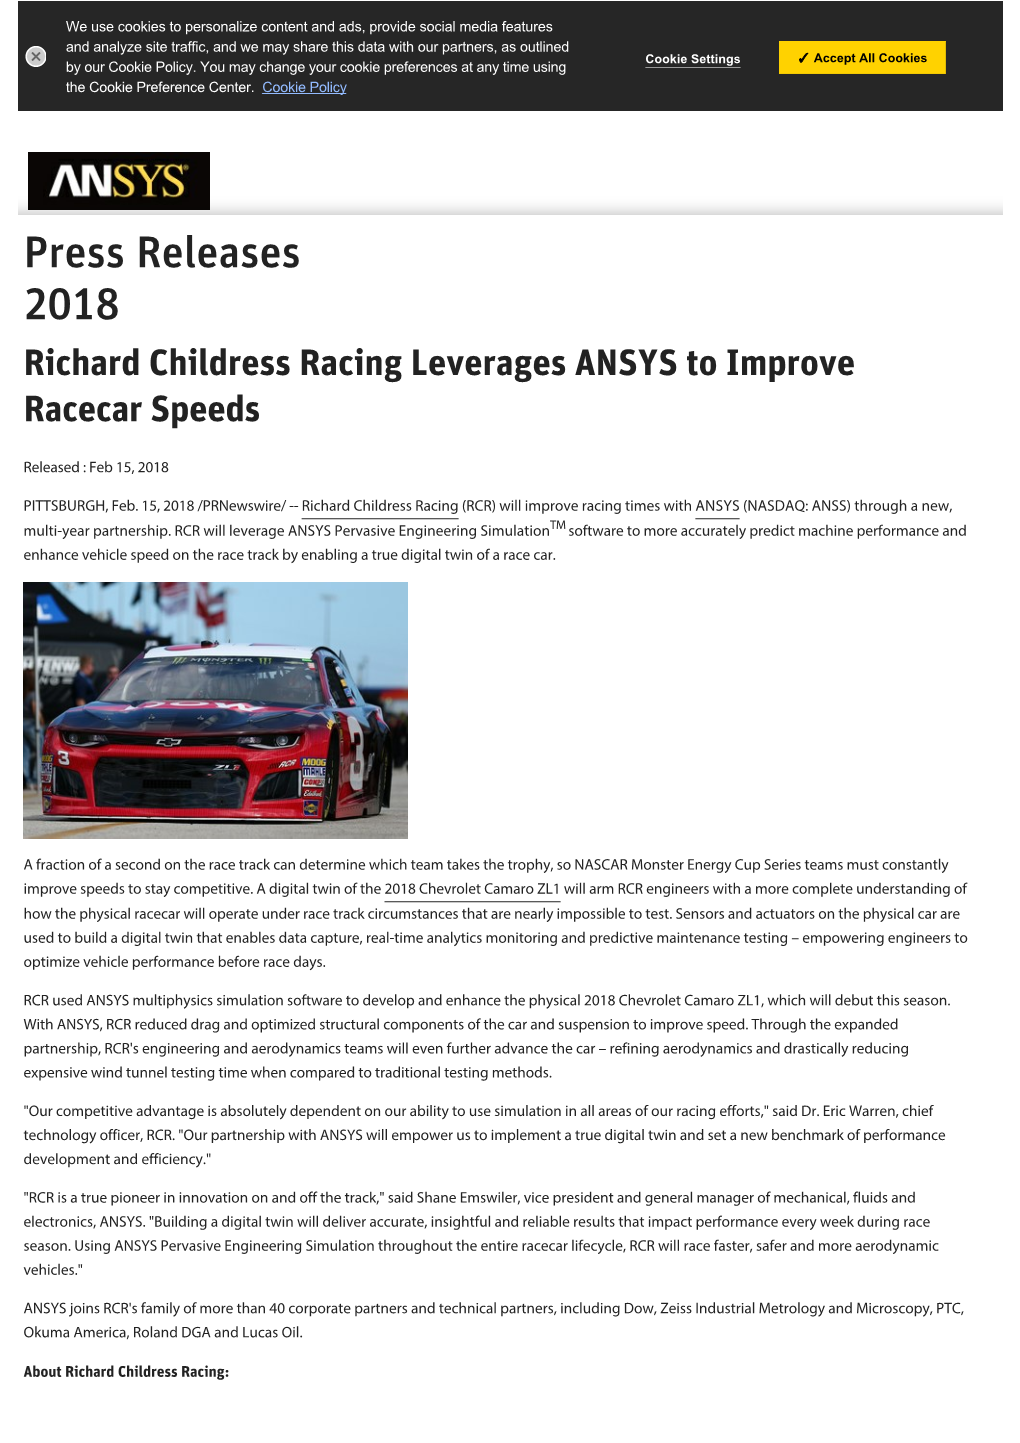 Press Releases 2018 Richard Childress Racing Leverages ANSYS to Improve Racecar Speeds